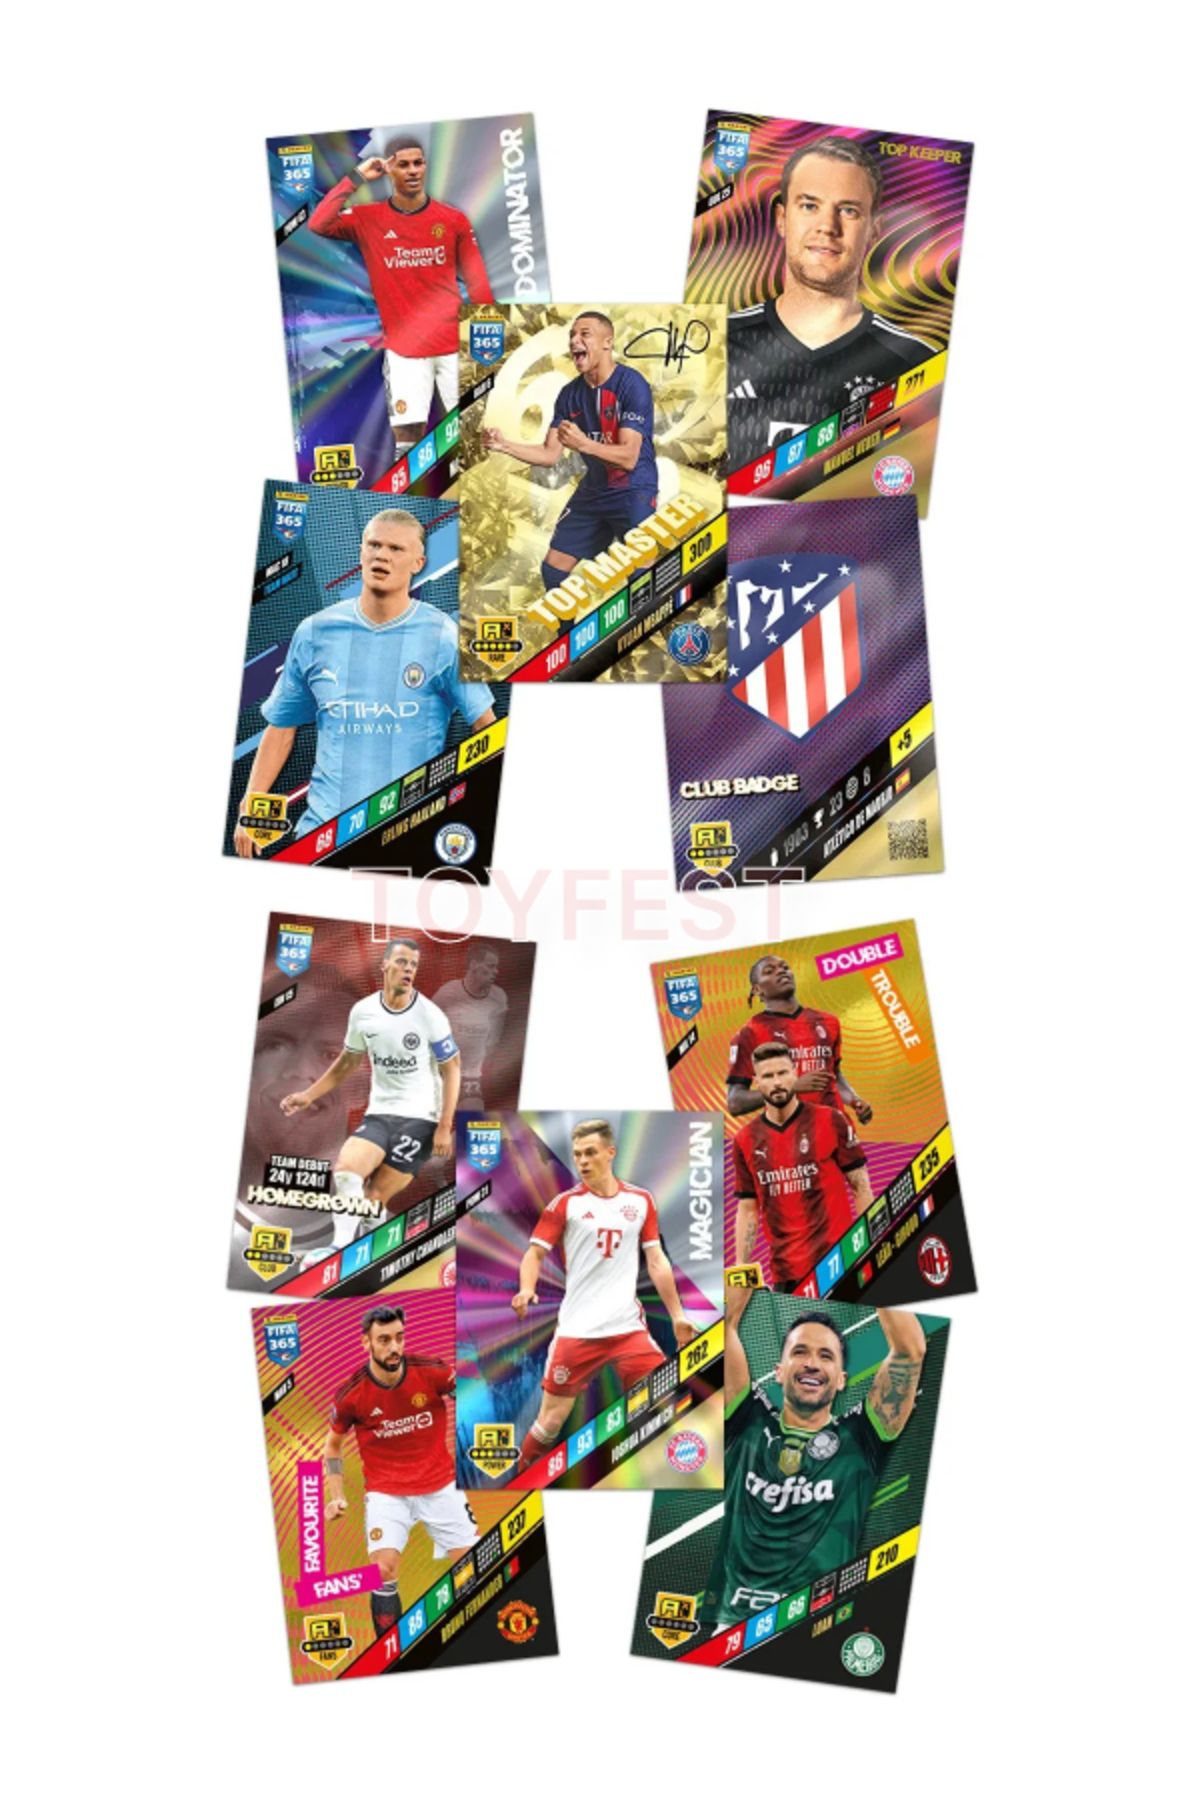 TOYFEST Panini Adrenalyn Fifa 365 - 2024 Official Trading Card Football  Player Cards (2 Packs)